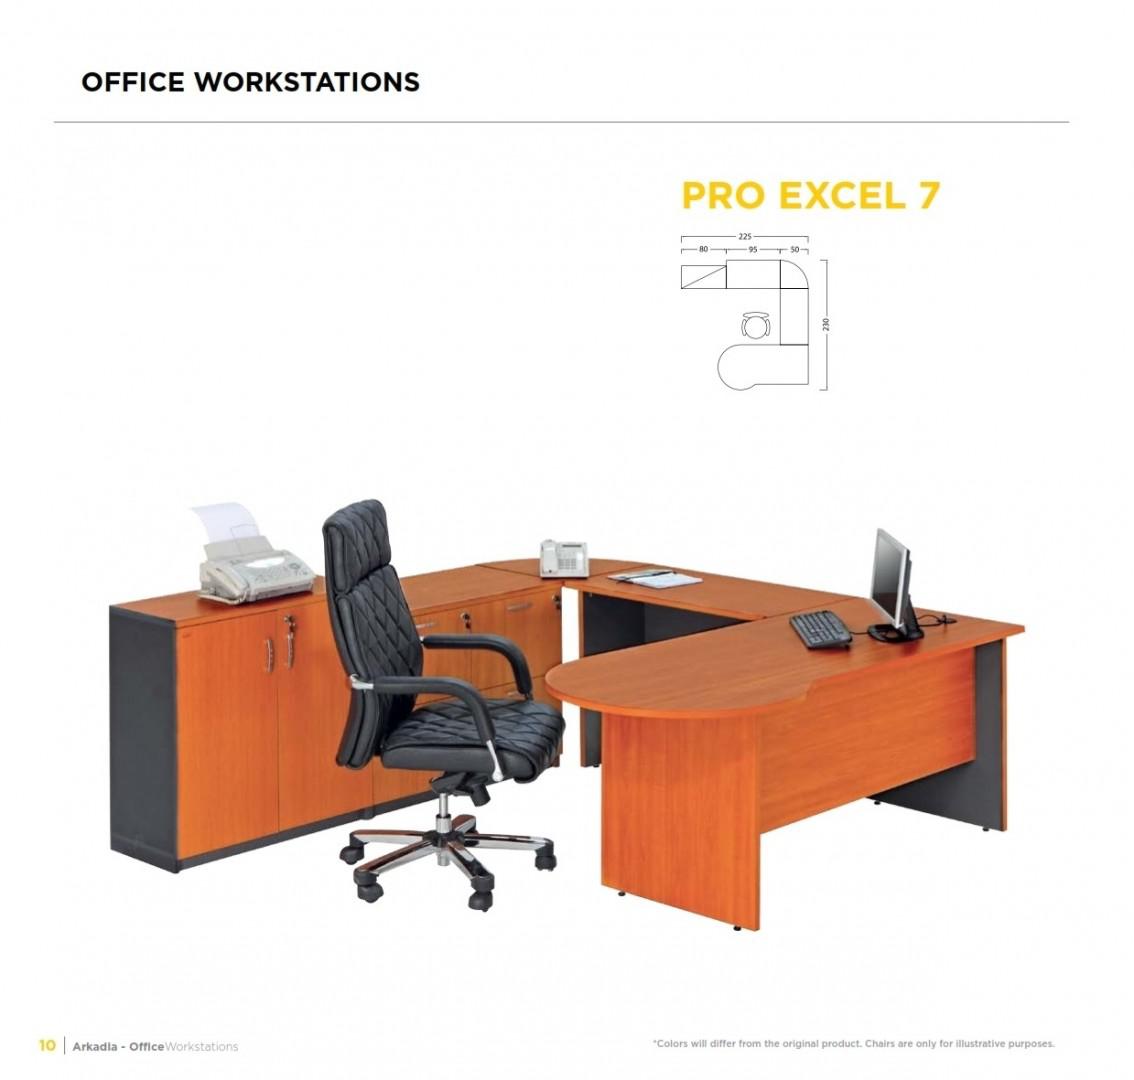 Pro Excel 7 from Arkadia Furniture